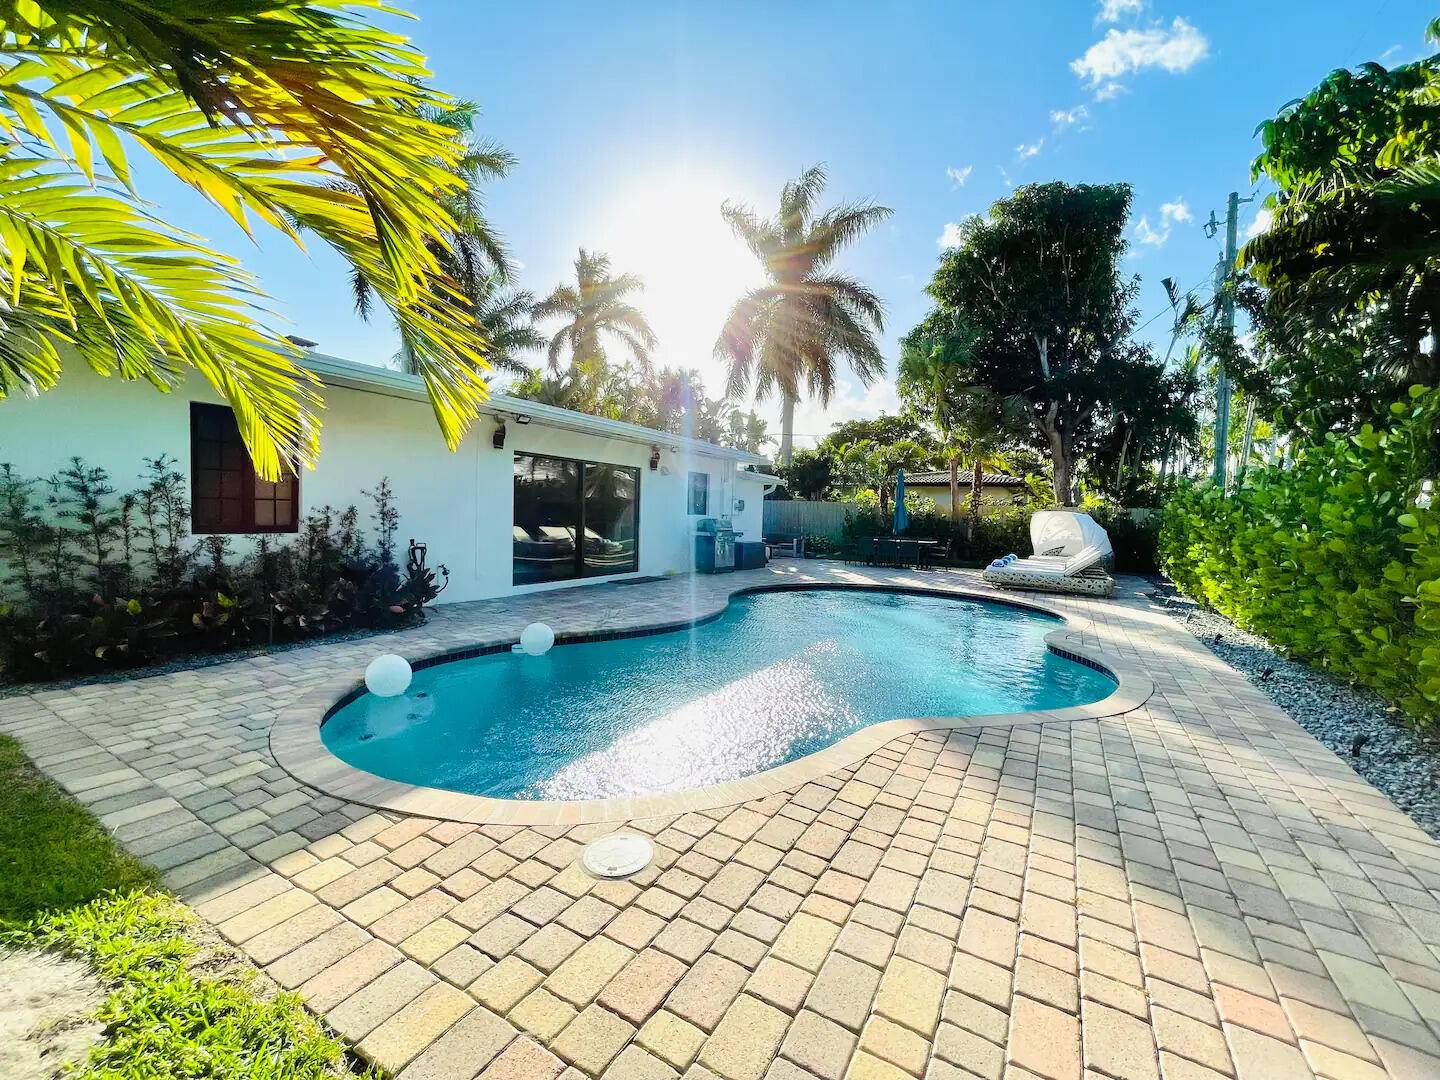 This stunning oceanside home is located just steps away from the beach, offering South Florida living at its finest.